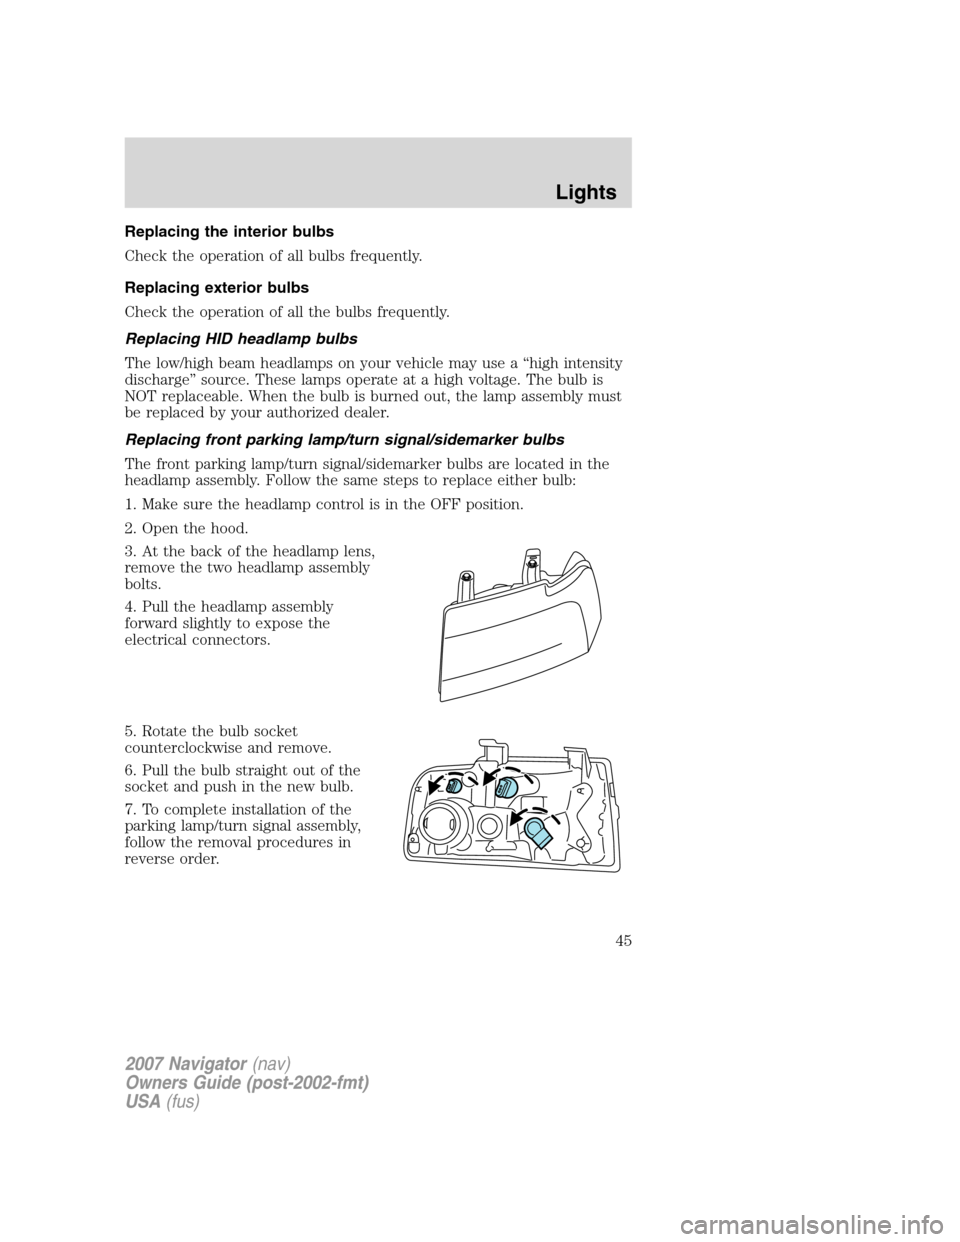 LINCOLN NAVIGATOR 2007  Owners Manual Replacing the interior bulbs
Check the operation of all bulbs frequently.
Replacing exterior bulbs
Check the operation of all the bulbs frequently.
Replacing HID headlamp bulbs
The low/high beam headl